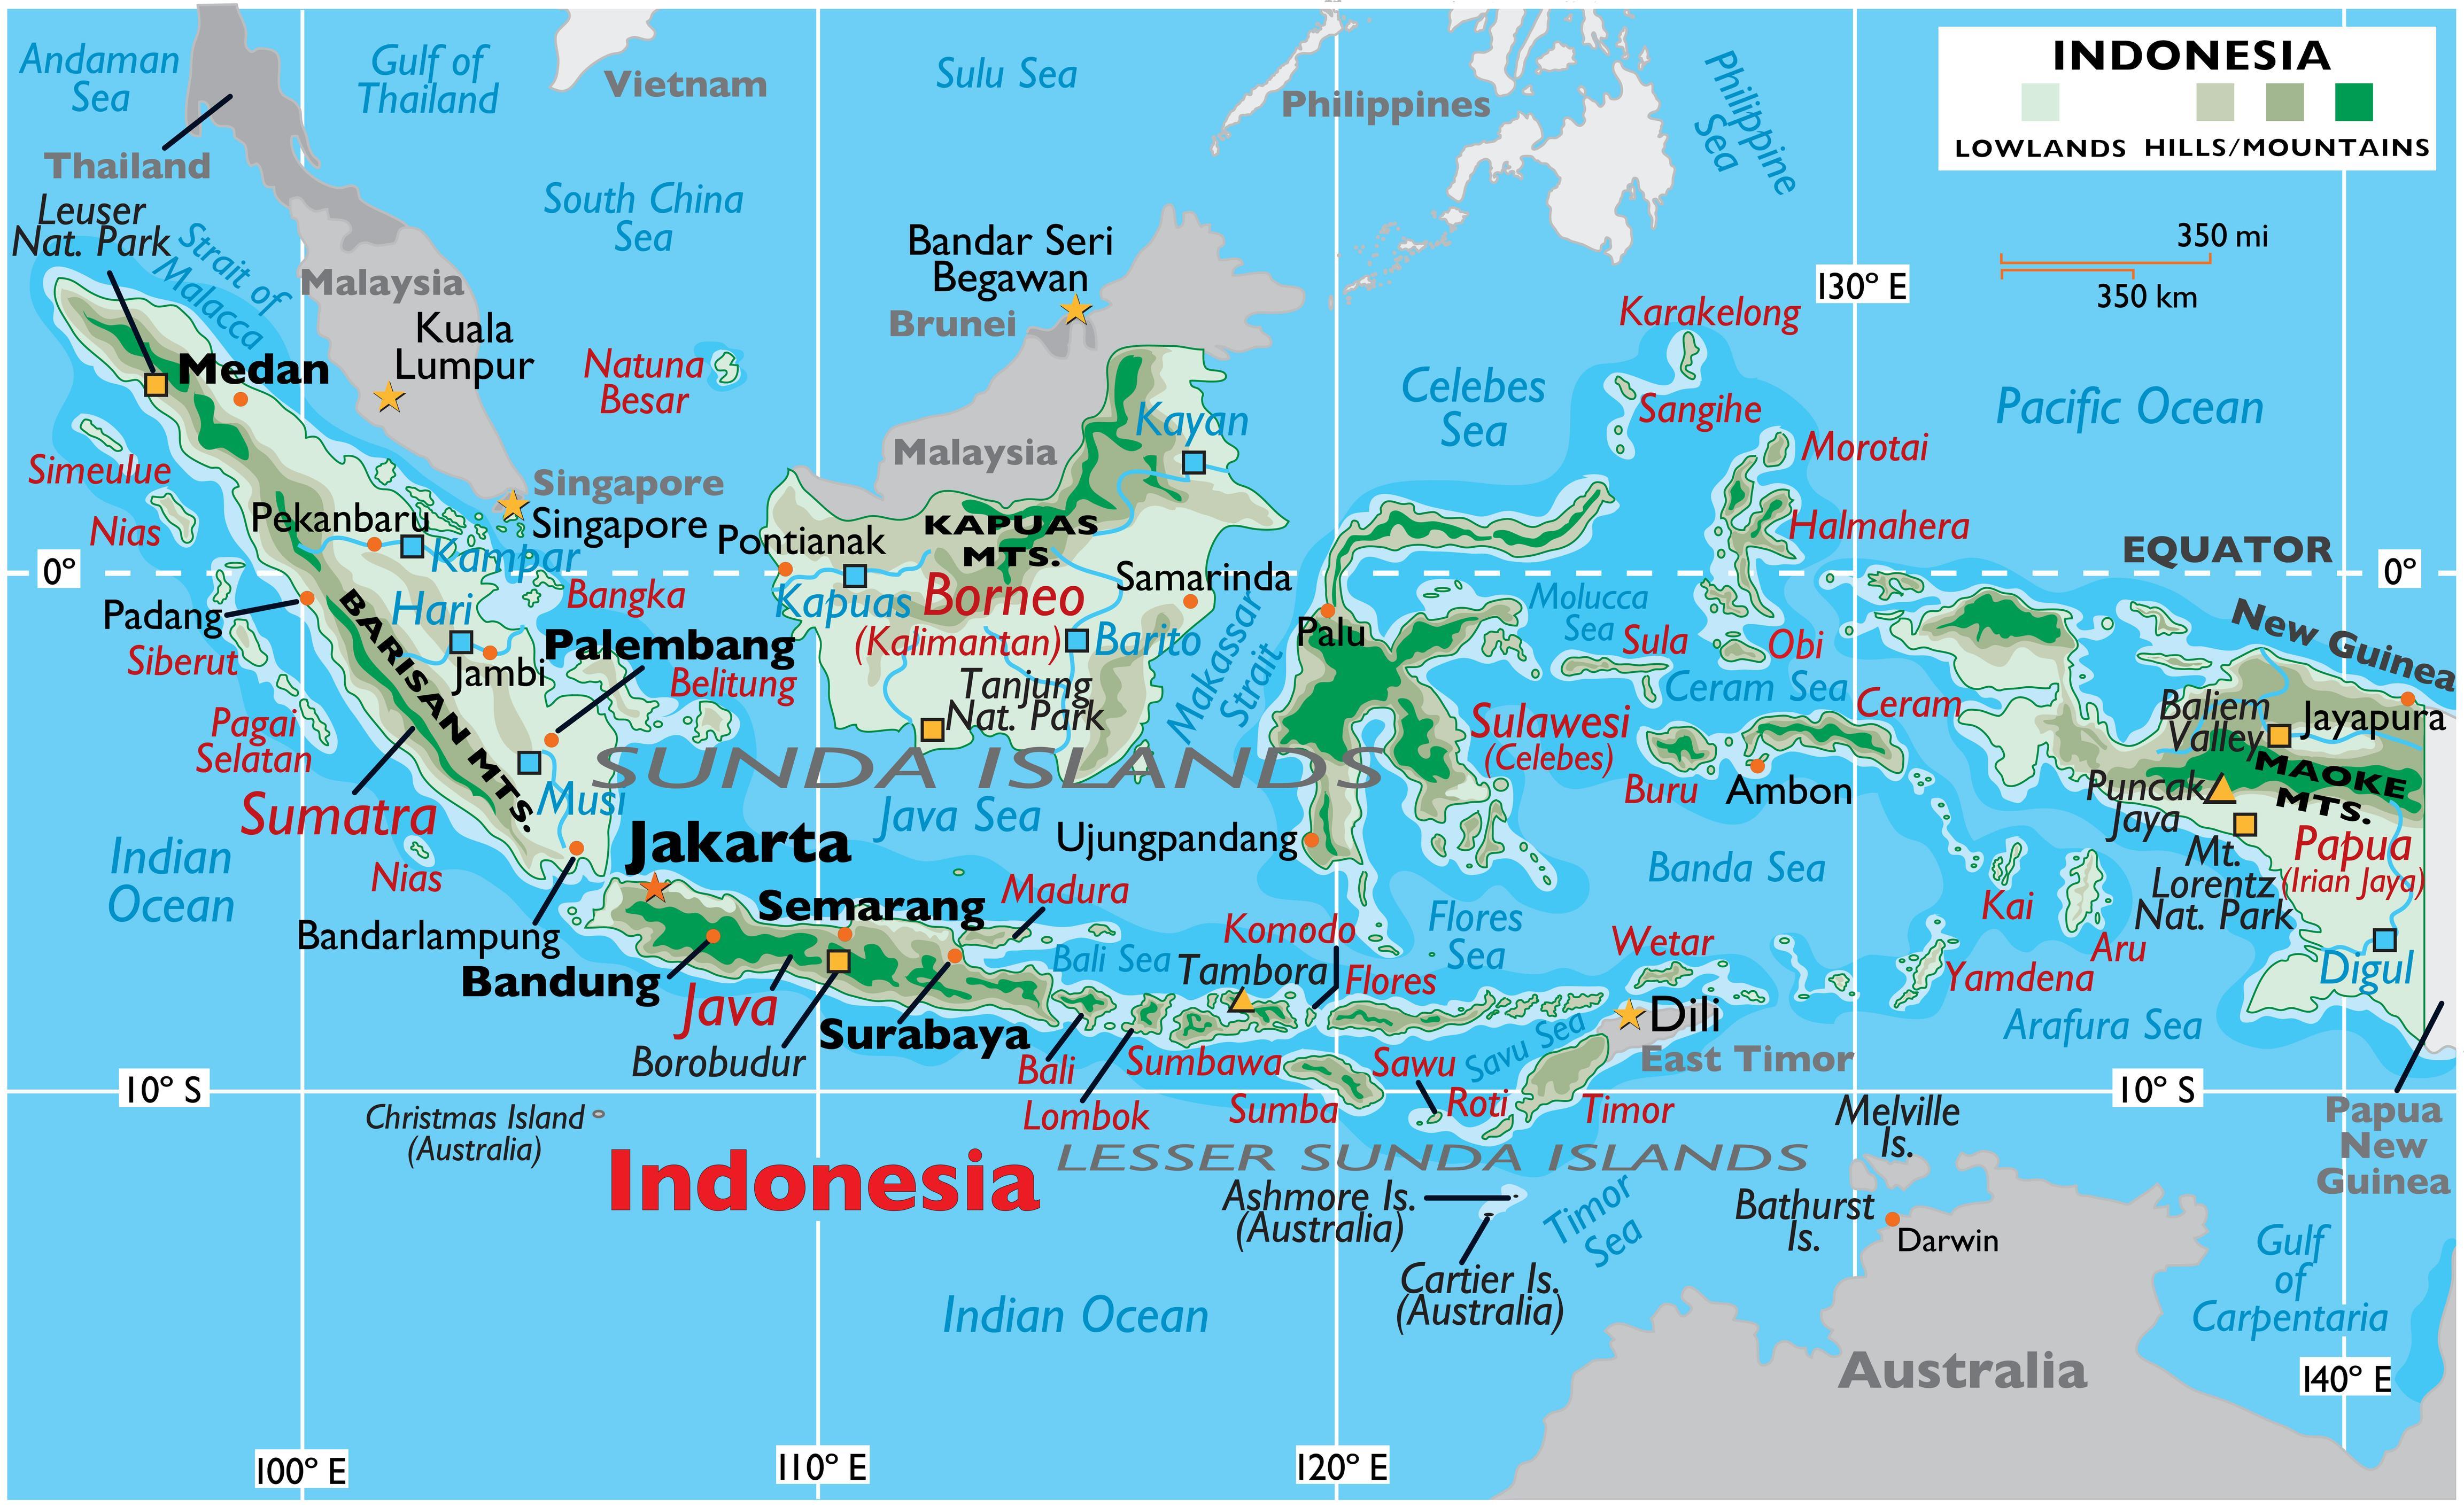 Indonesia Map / Geography of Indonesia / Map of Indonesia - Worldatlas.com